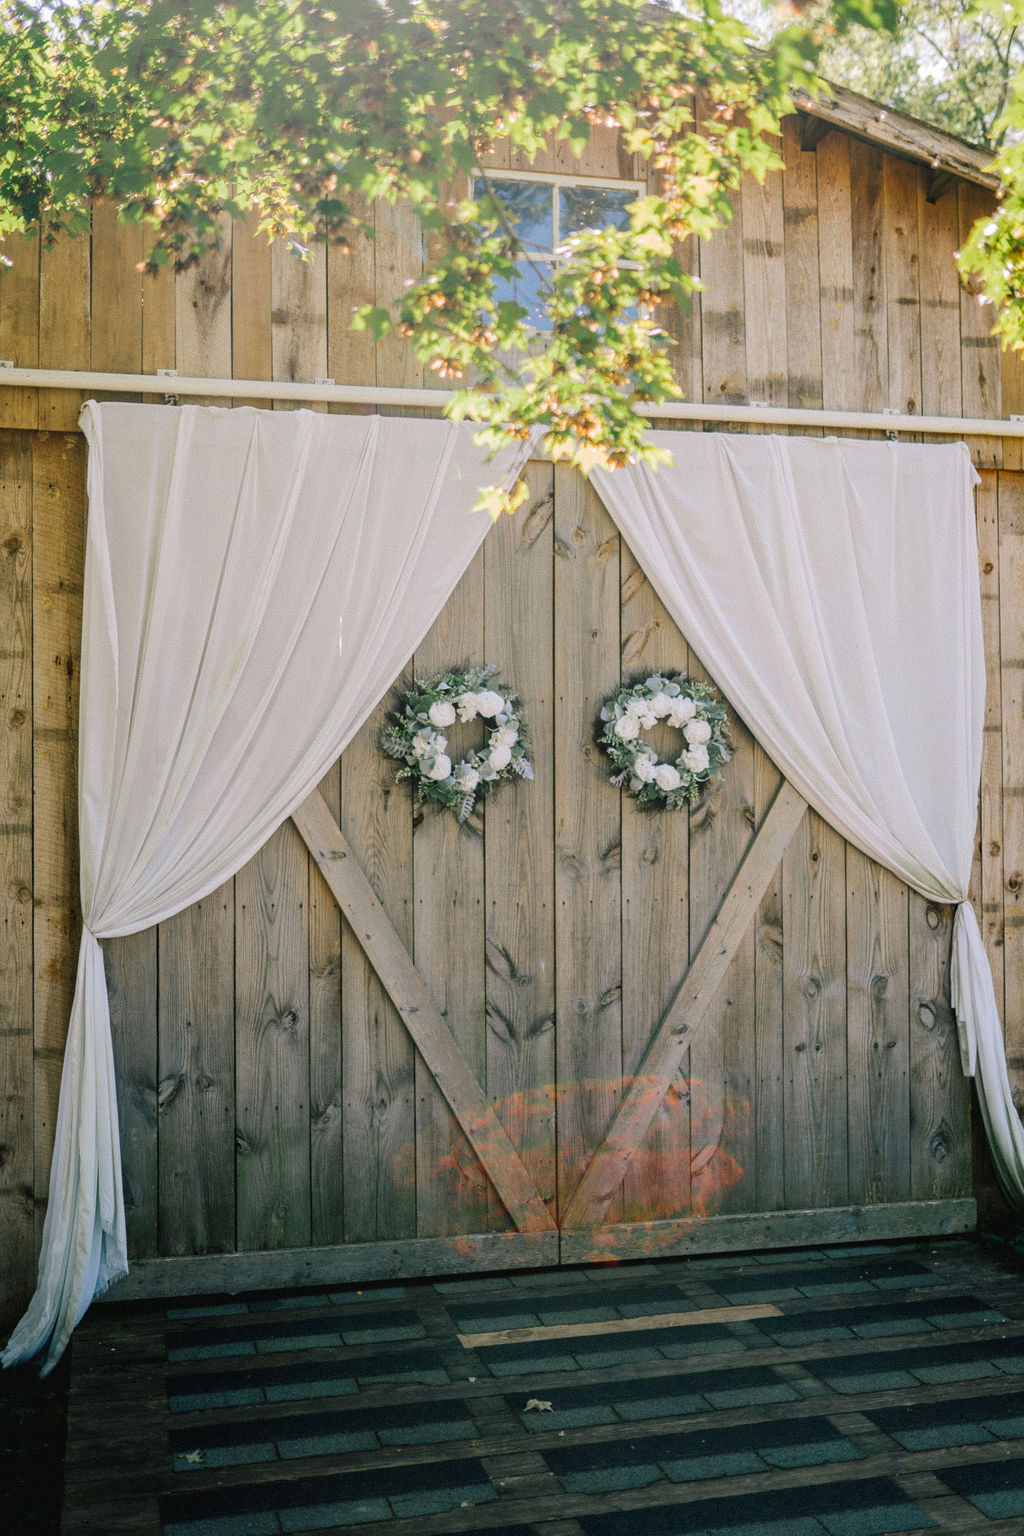 Decorated barn entrance with white curtains and flower wreaths